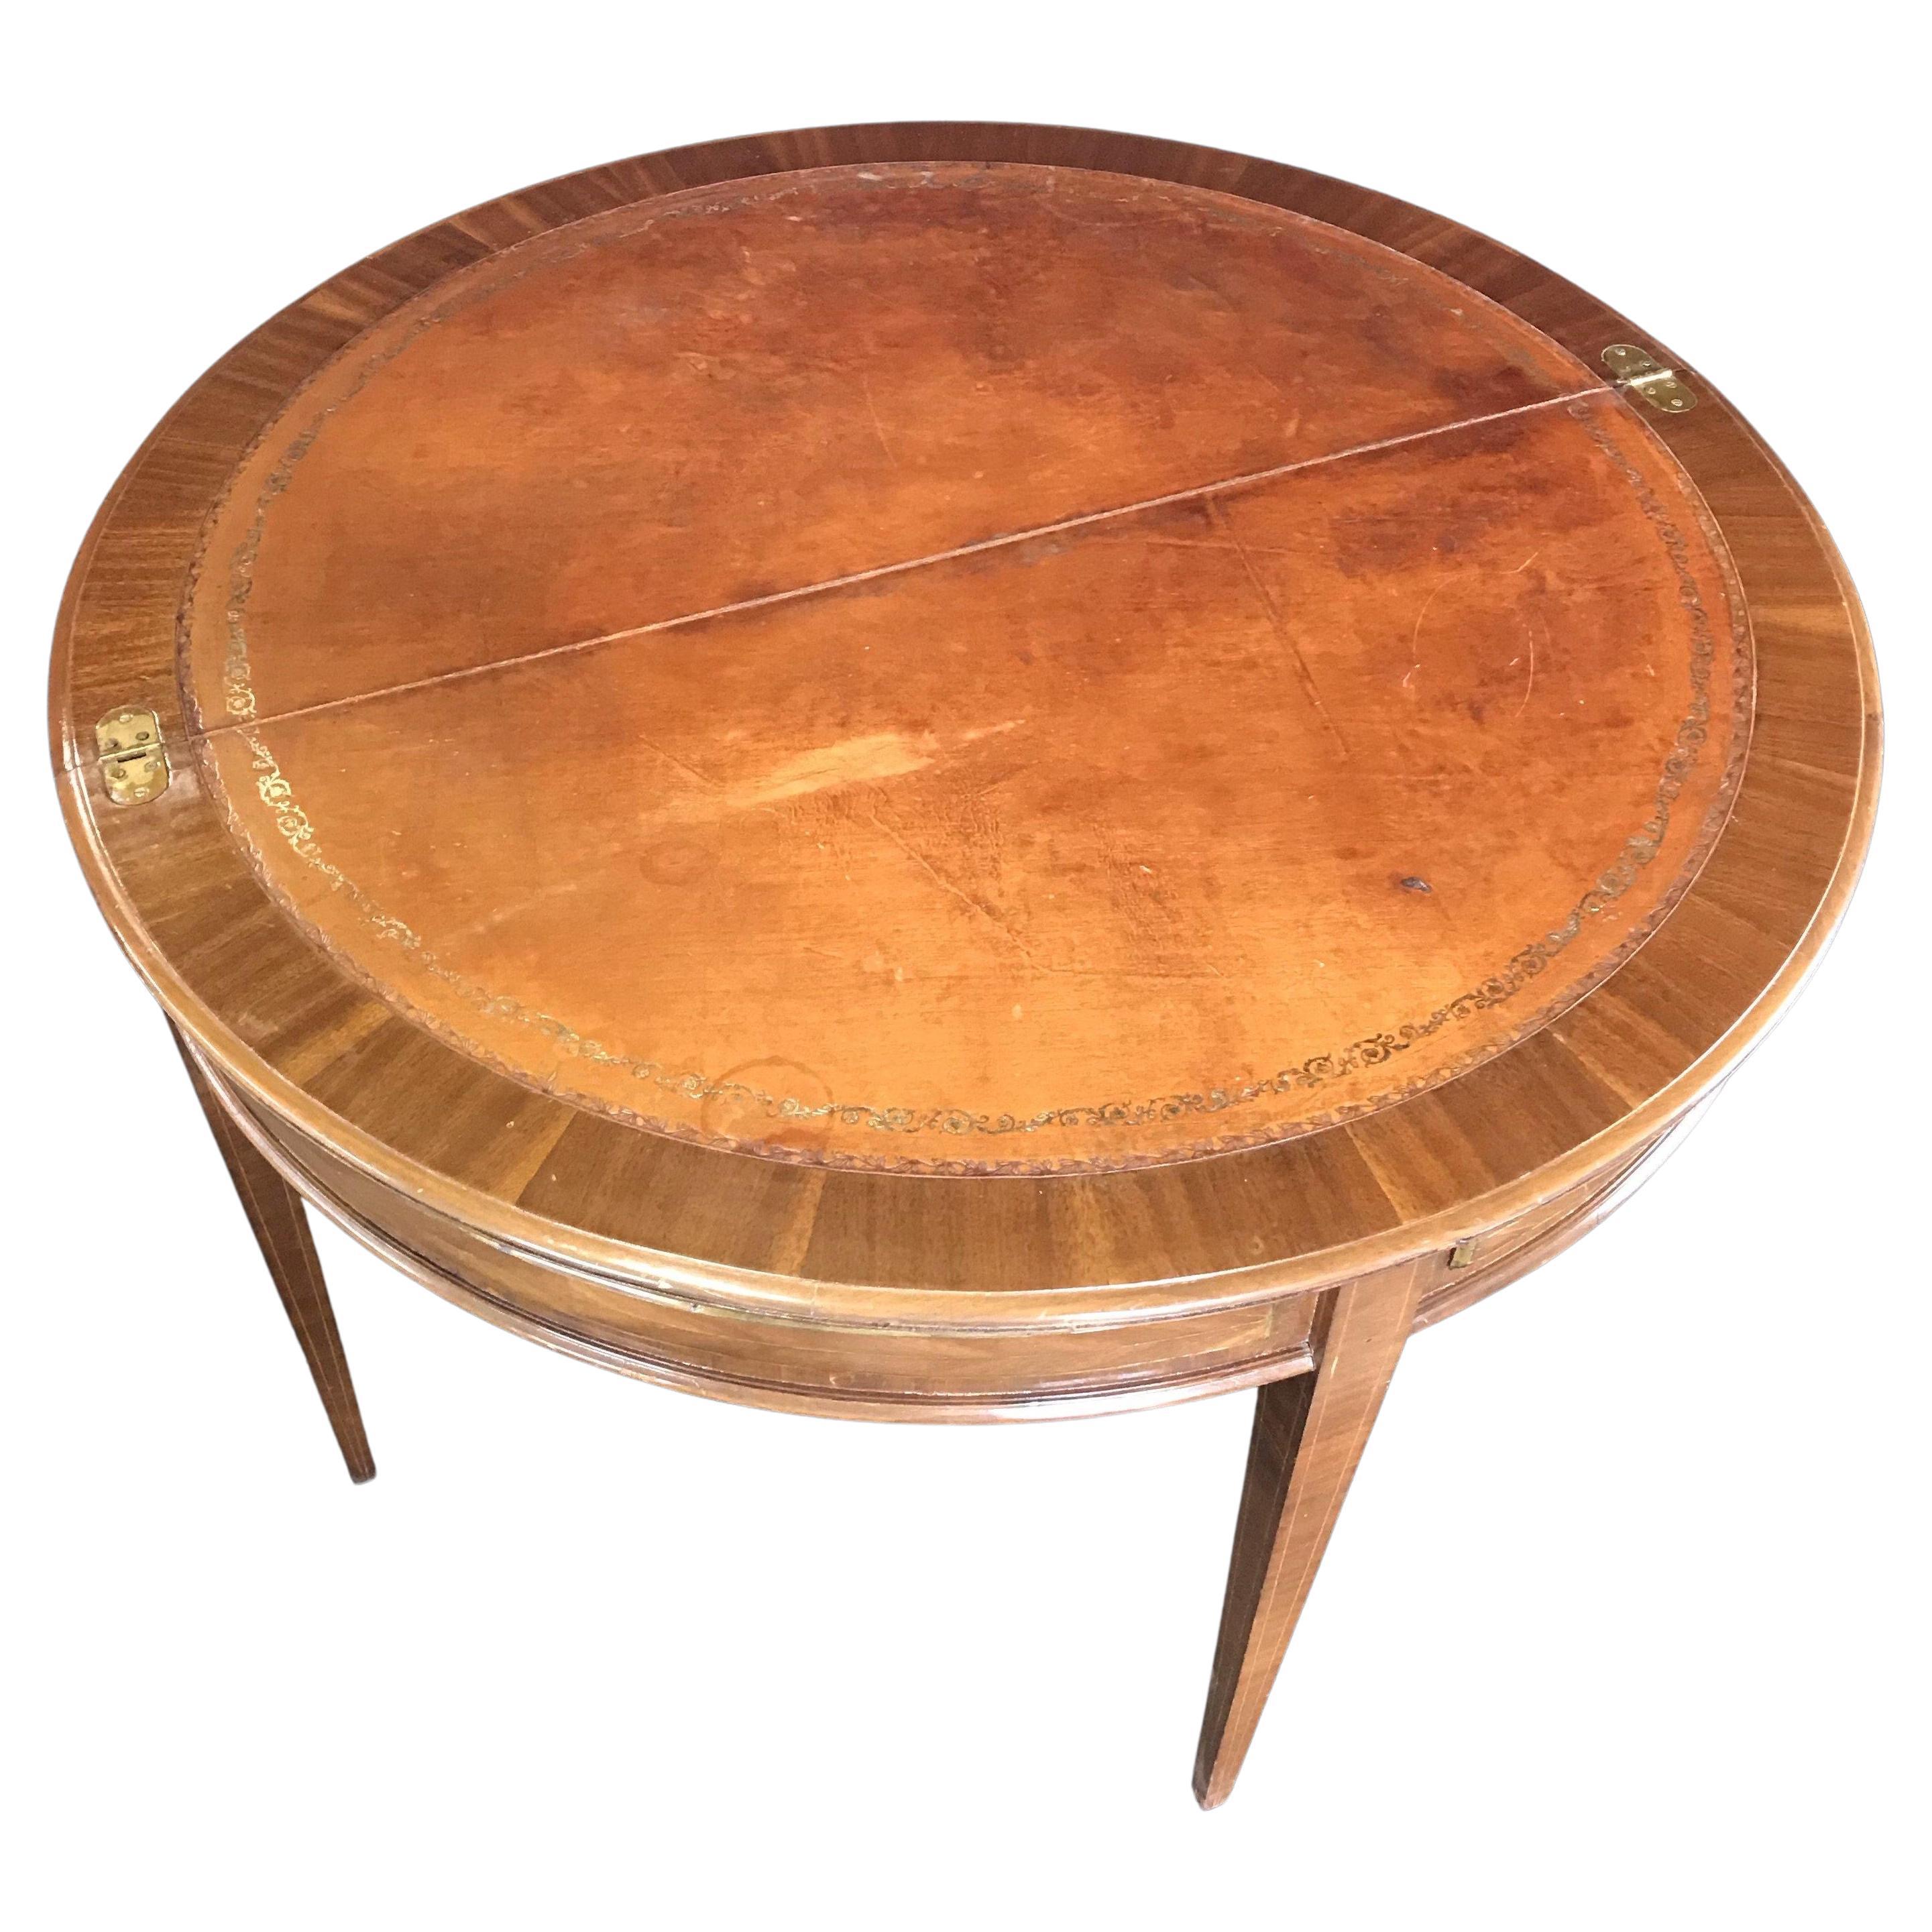 French Walnut Demilune Table Round Table with Leather Top 1